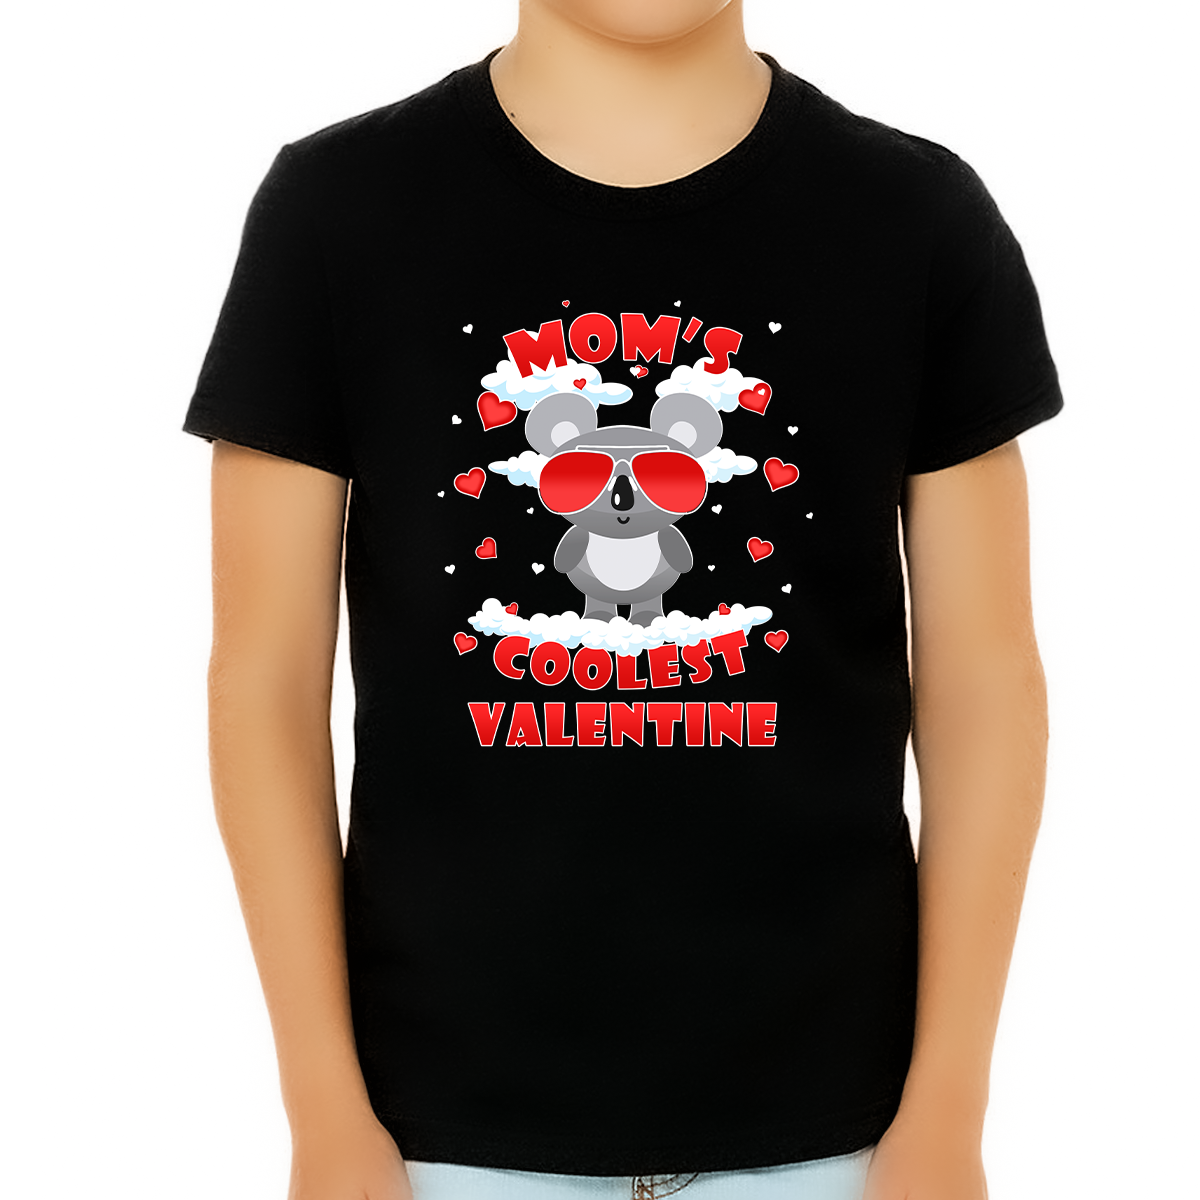 Boys Valentines Day Shirt Funny Mom's Coolest Valentine Shirt for Boys Valentines Day Gifts for Kids